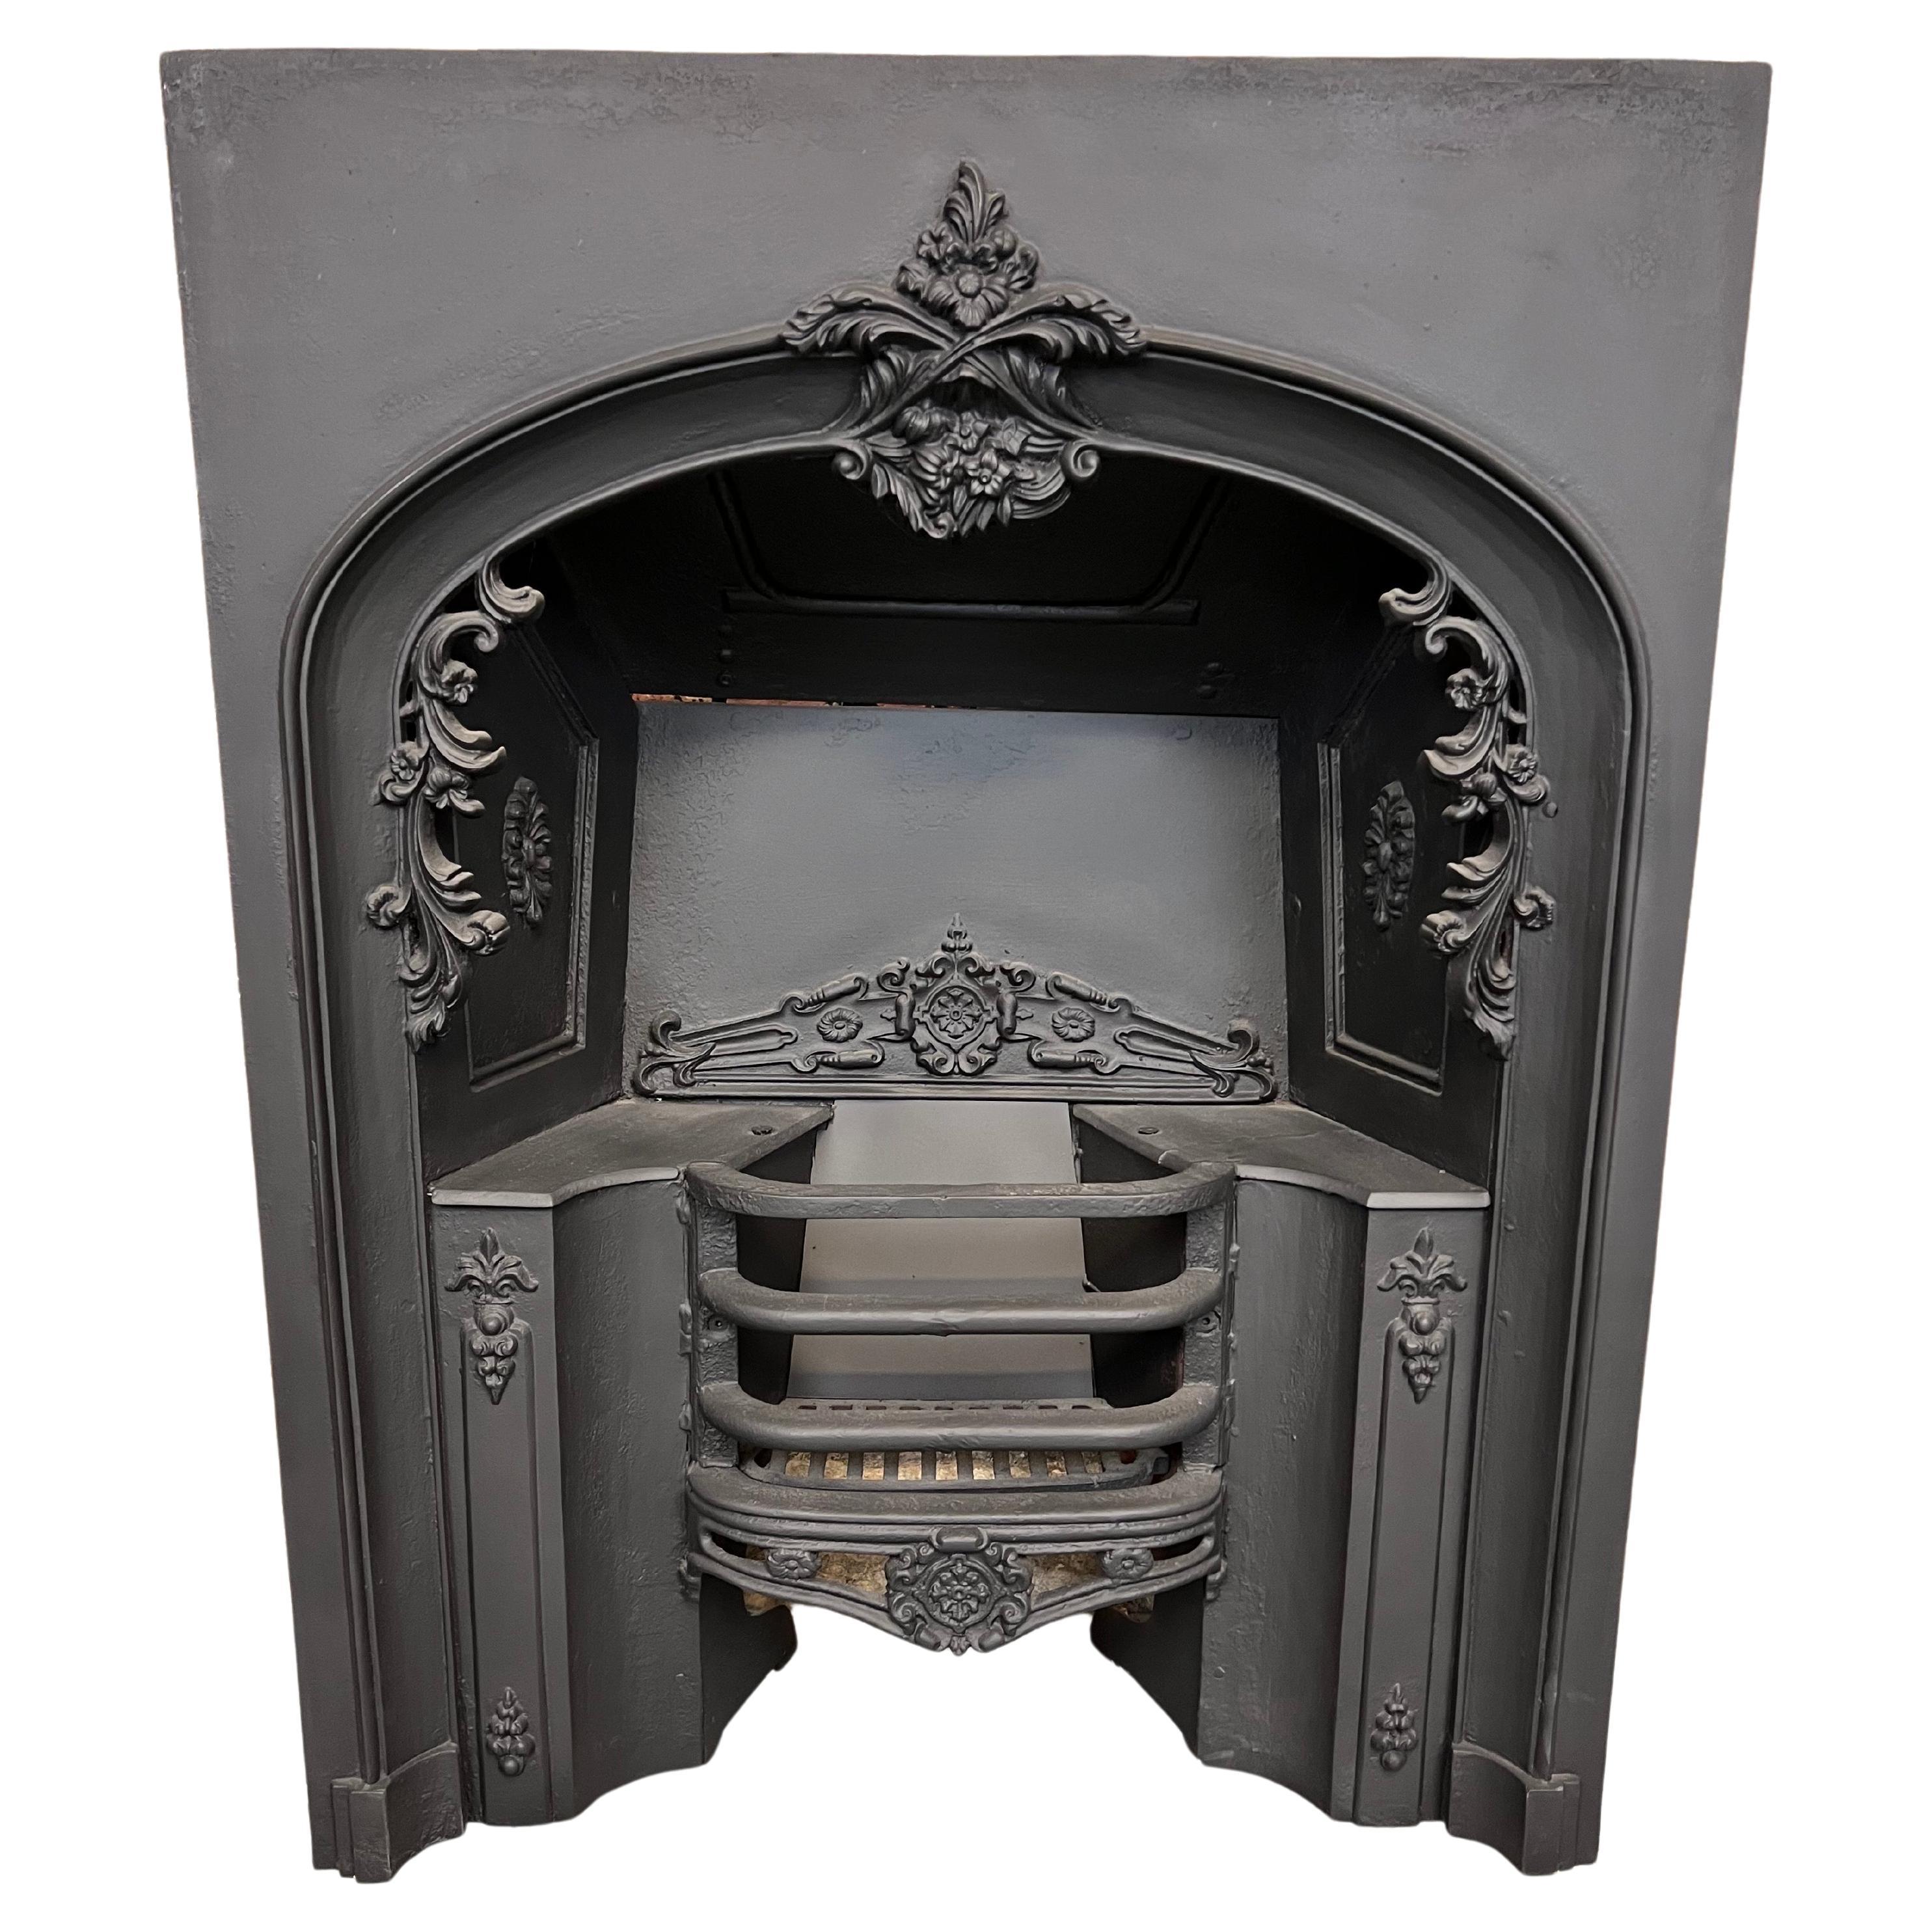 19th Century Victorian Cast Iron Hob Grate Fireplace For Sale